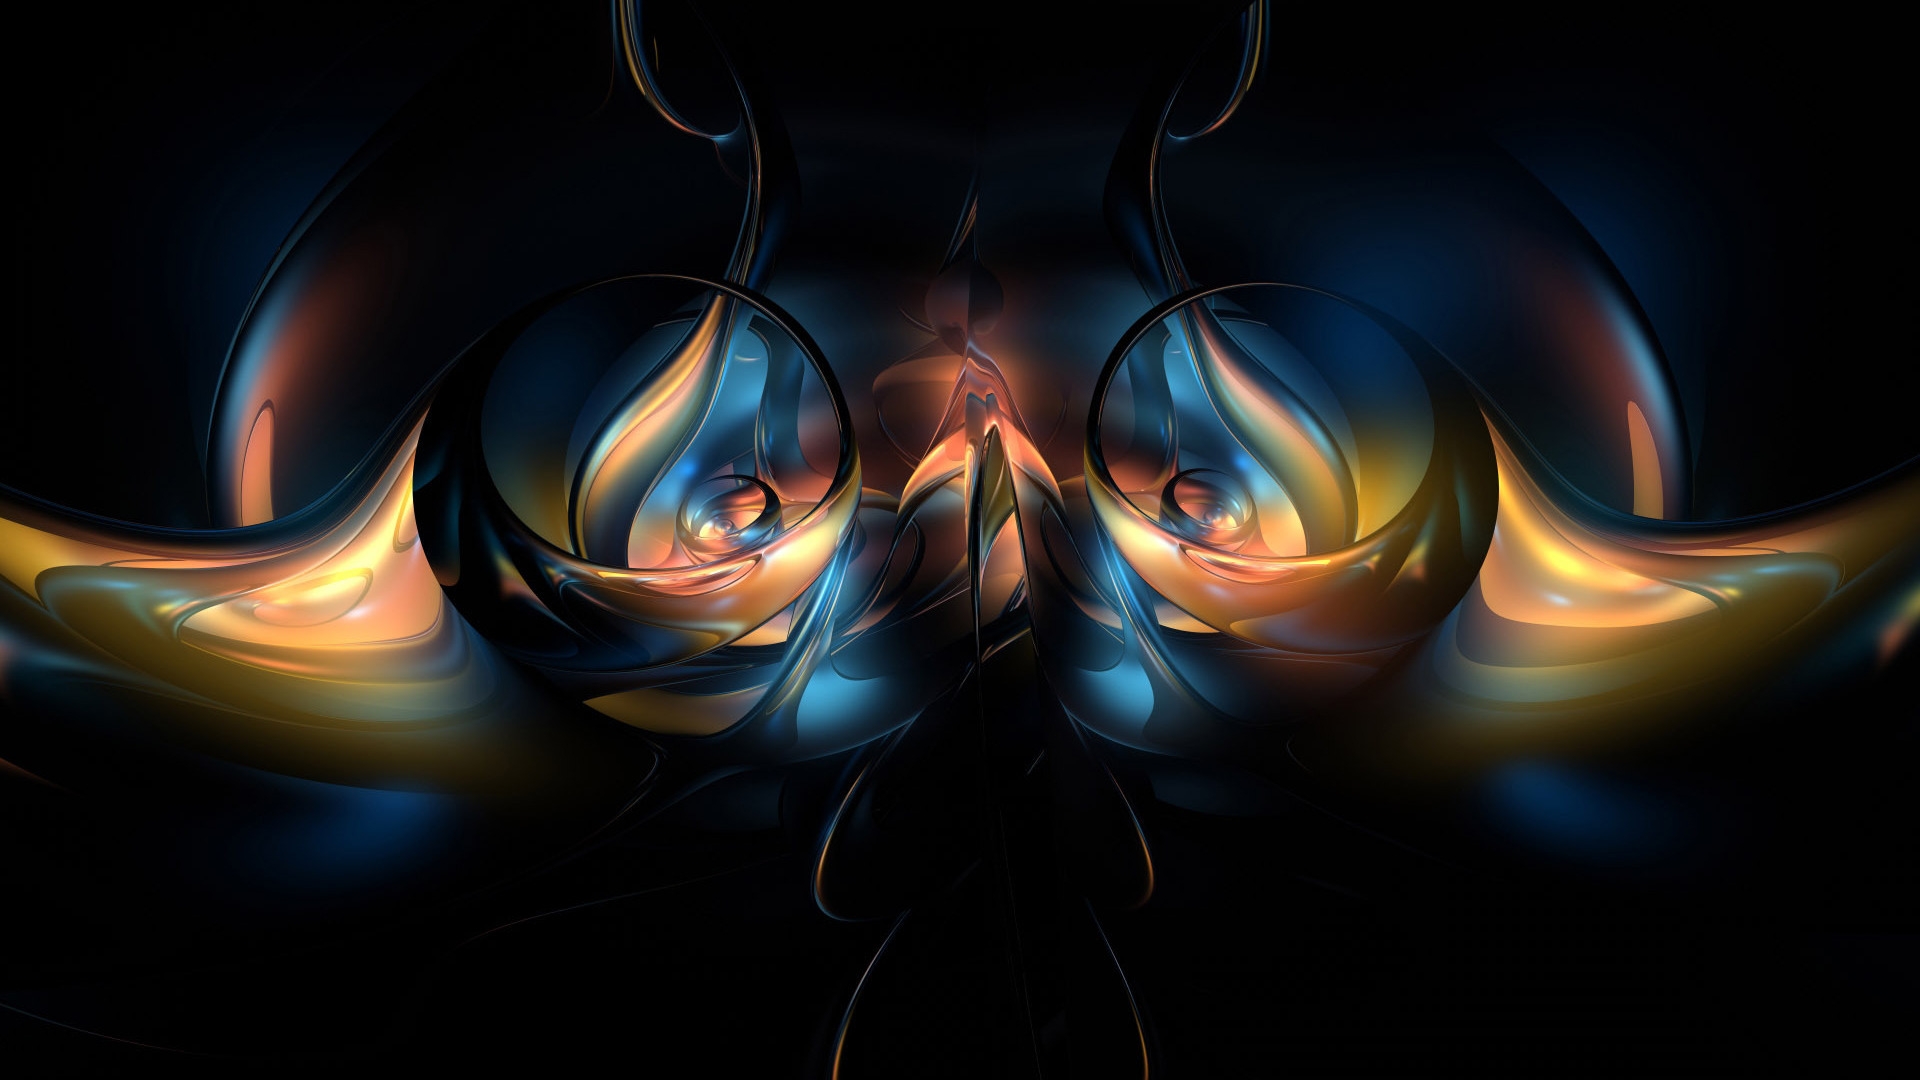 Abstract Forms for 1920 x 1080 HDTV 1080p resolution